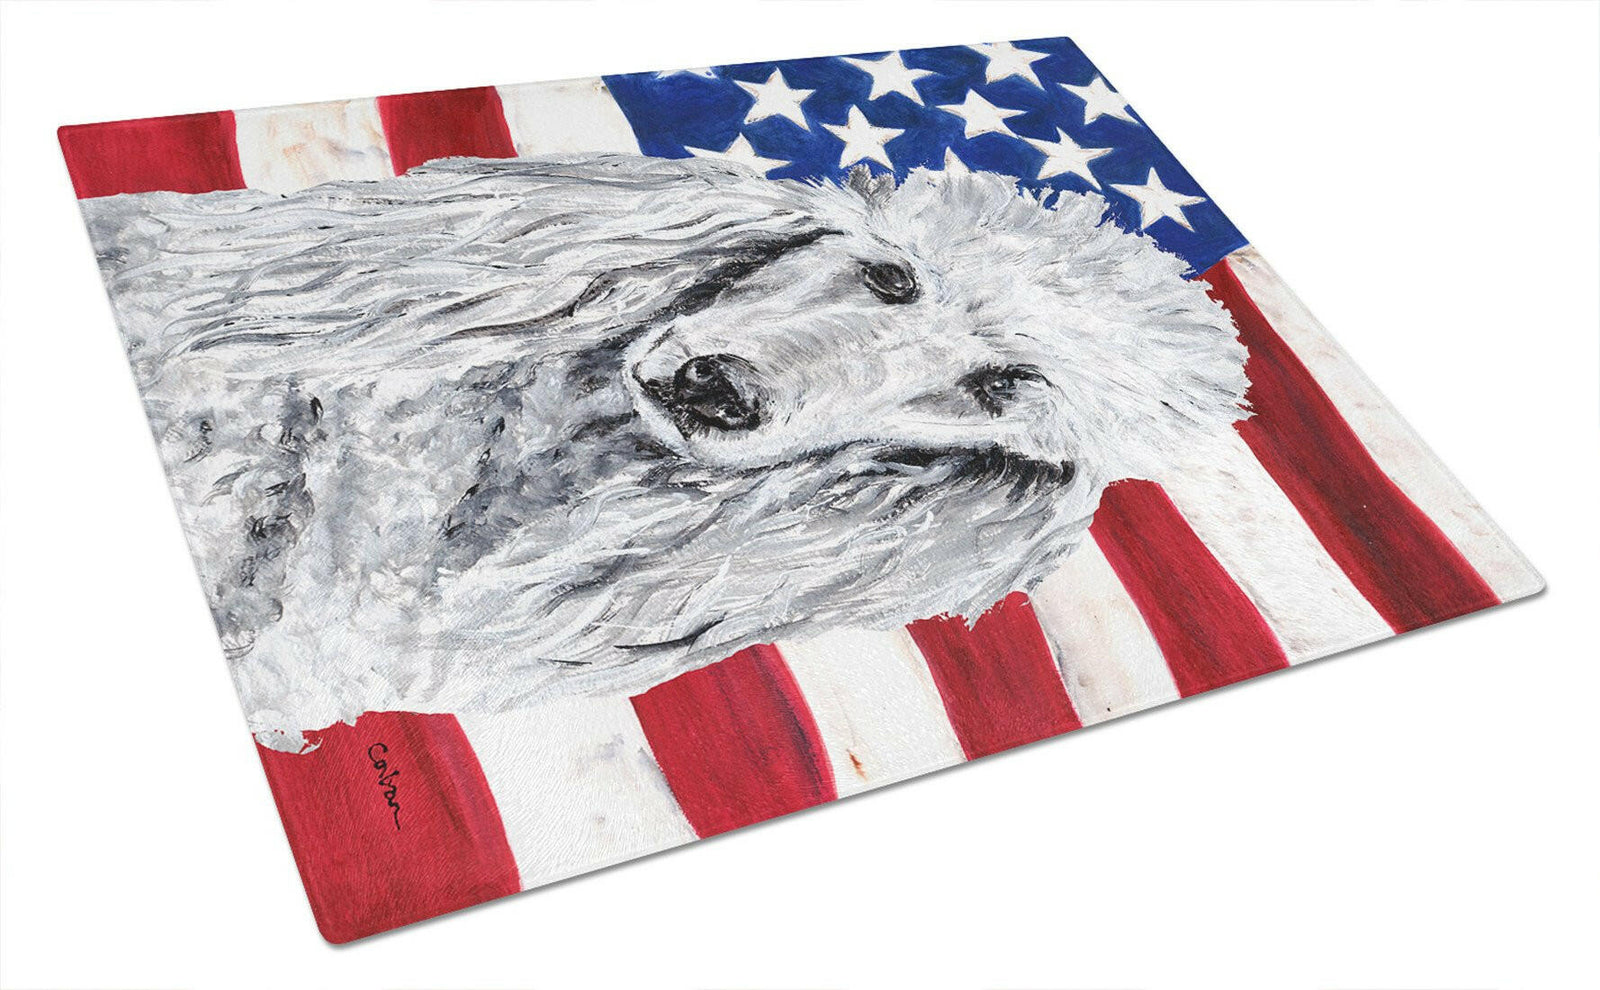 White Standard Poodle with American Flag USA Glass Cutting Board Large Size SC9631LCB by Caroline's Treasures